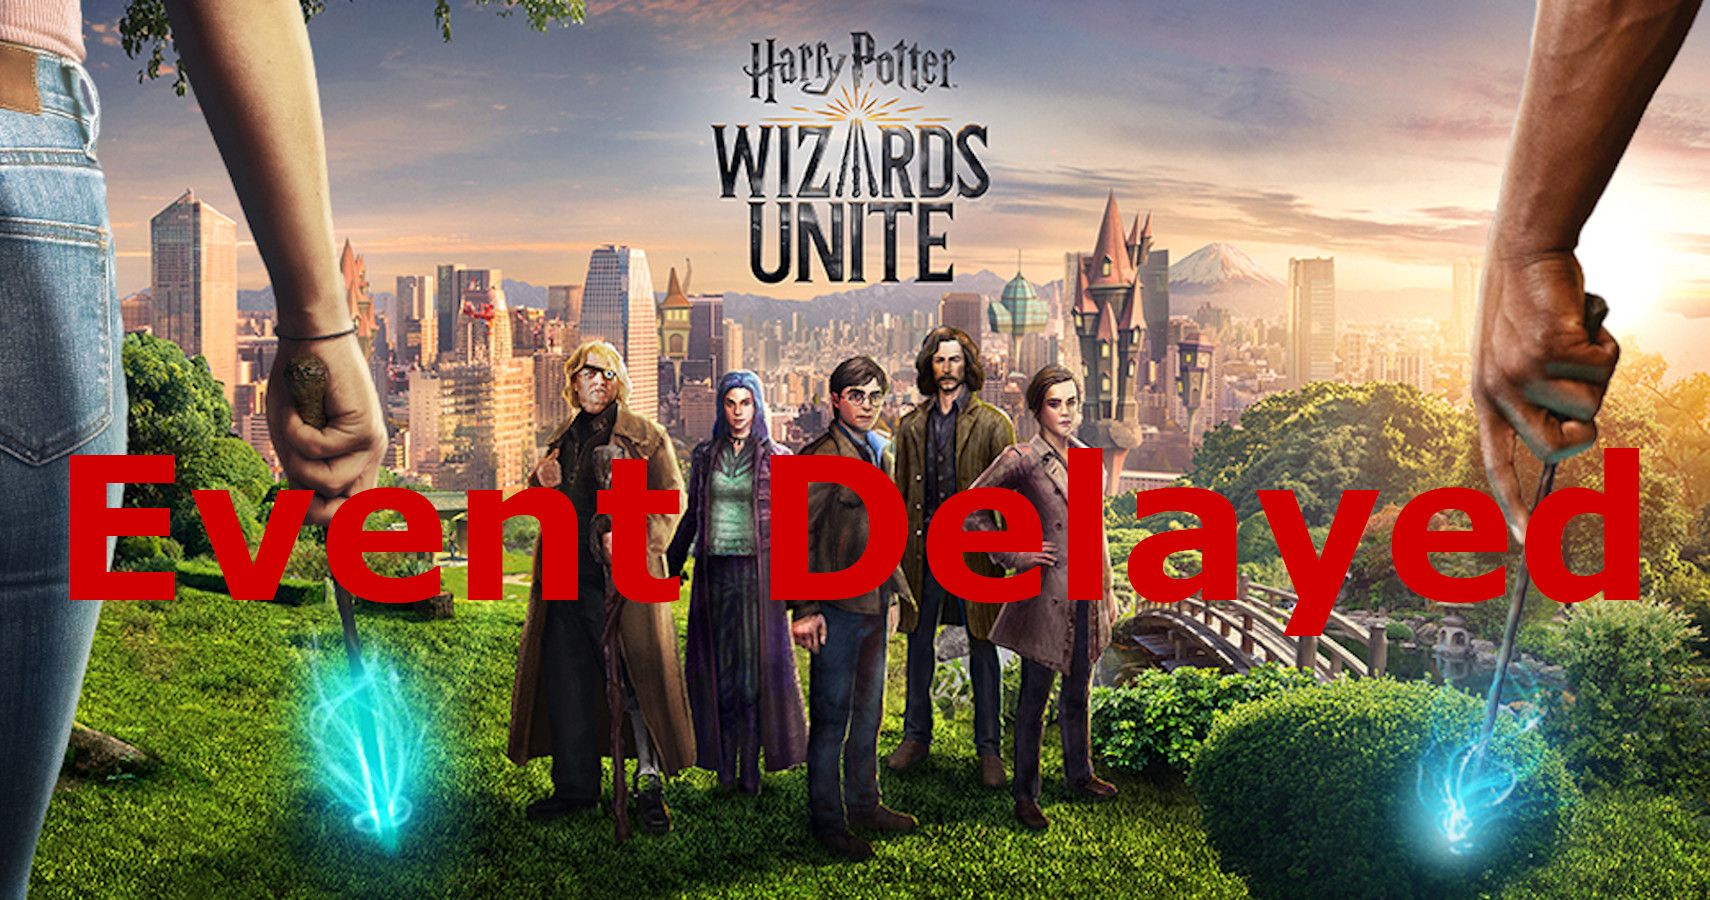 Harry Potter Wizards Unite Delays Next Event Due To Ongoing Issues